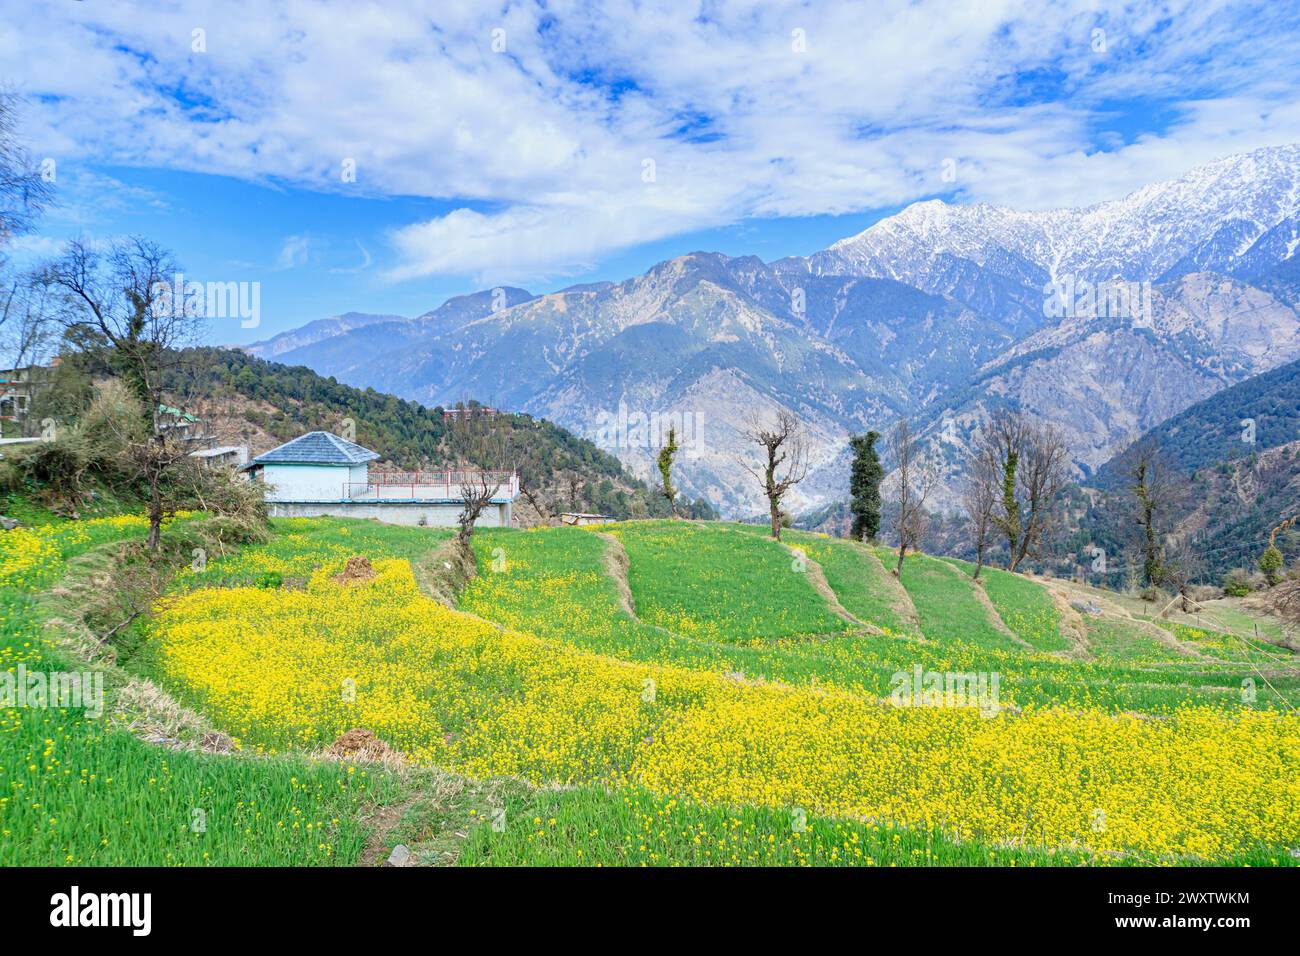 Panoramic view from Naddi View Point over flower-filled terraced fields to the massive picturesque snow-capped Himalayan Dhauladhar Range mountains Stock Photo